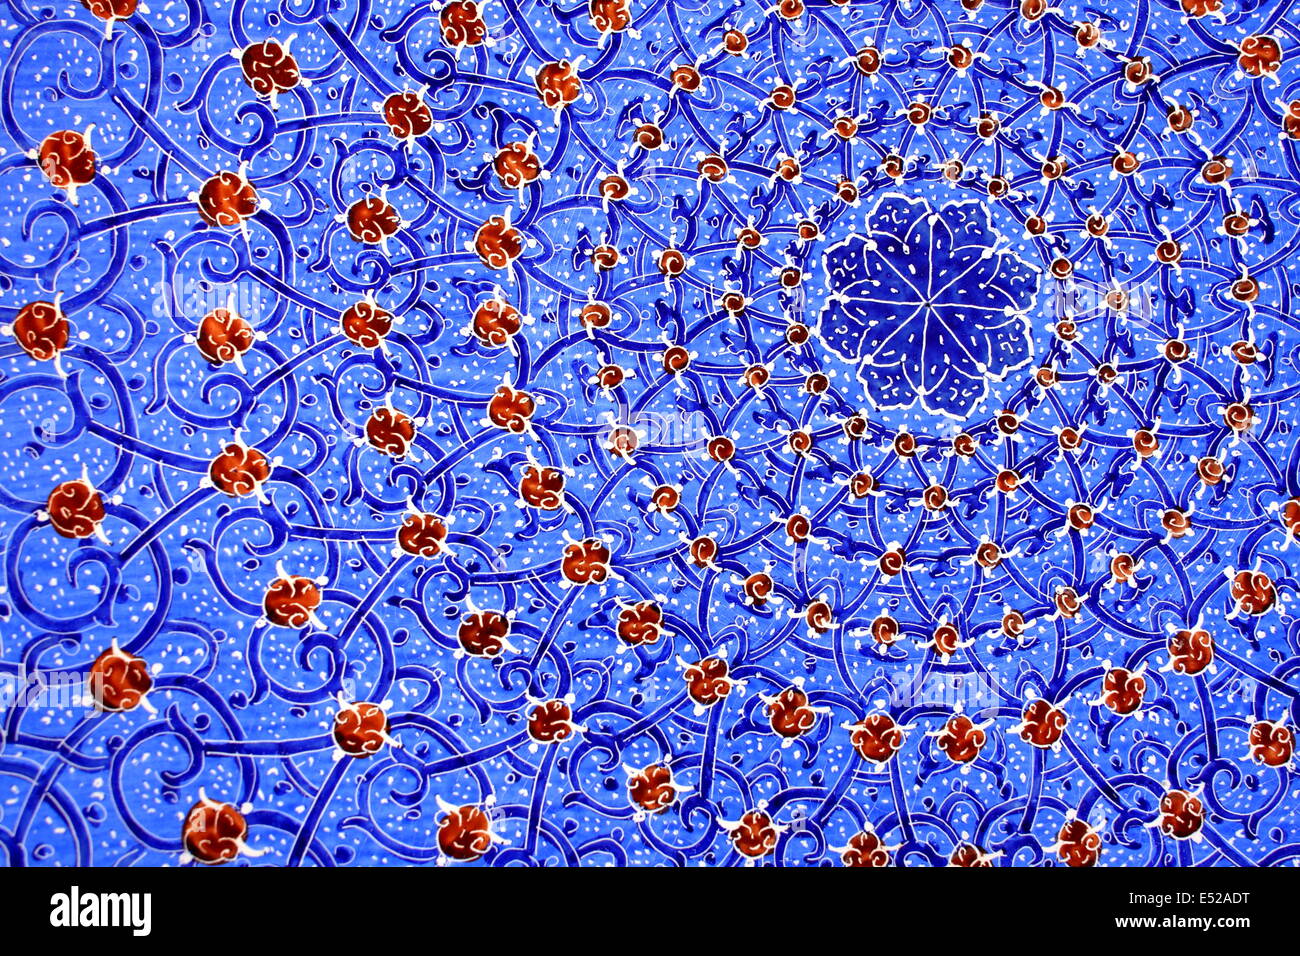 Close up view of a blue turquoise enameled metal plate from Iran (Persia) Stock Photo